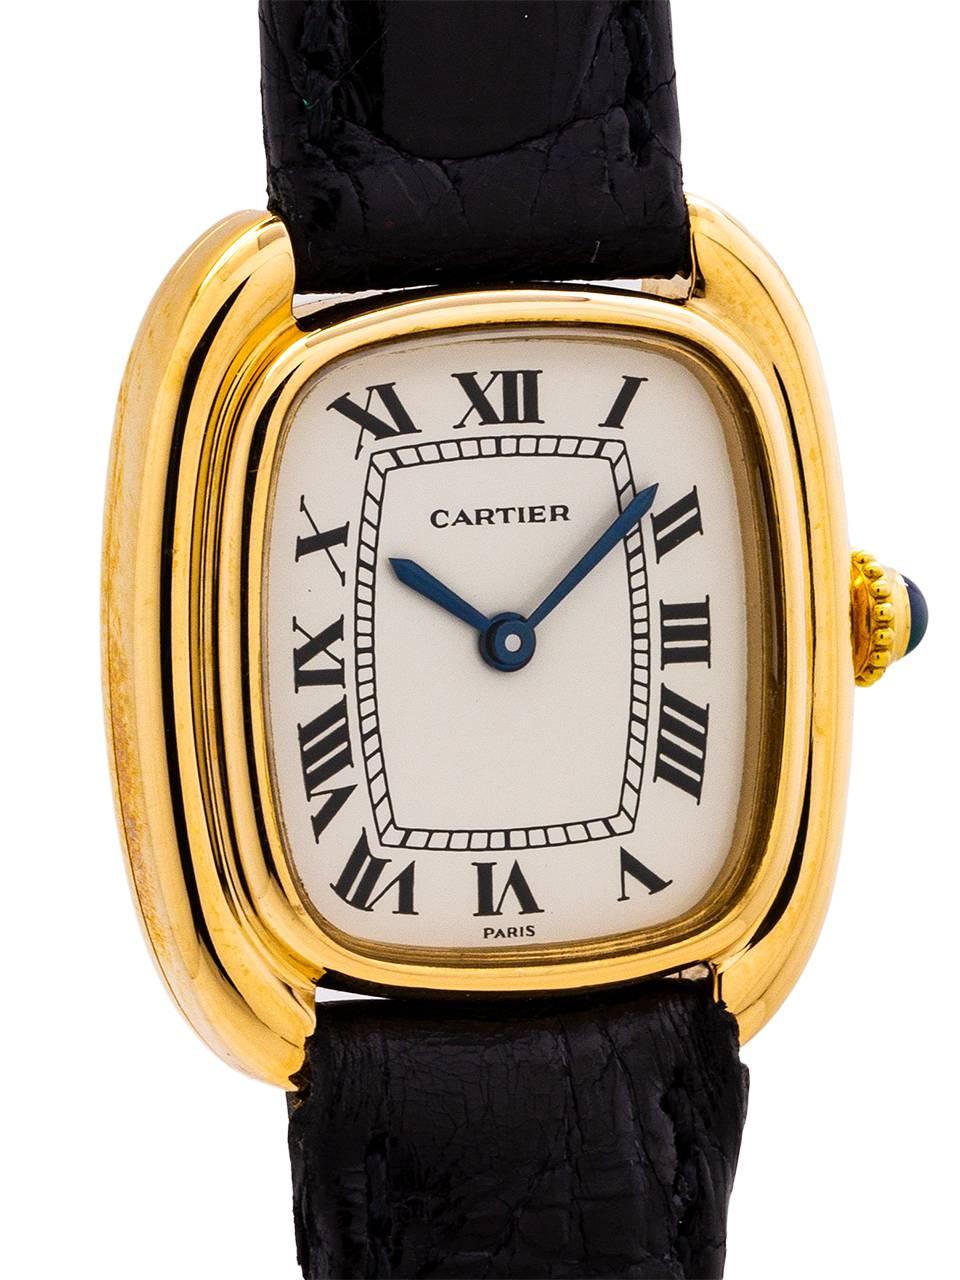 
Cartier 18K YG lady Gondole model circa 1980’s. Scarce and great looking elongated cushion shaped case with stepped and grooved sides. With mineral glass crystal and original glossy white classic Cartier dial with Roman figures and blued steel